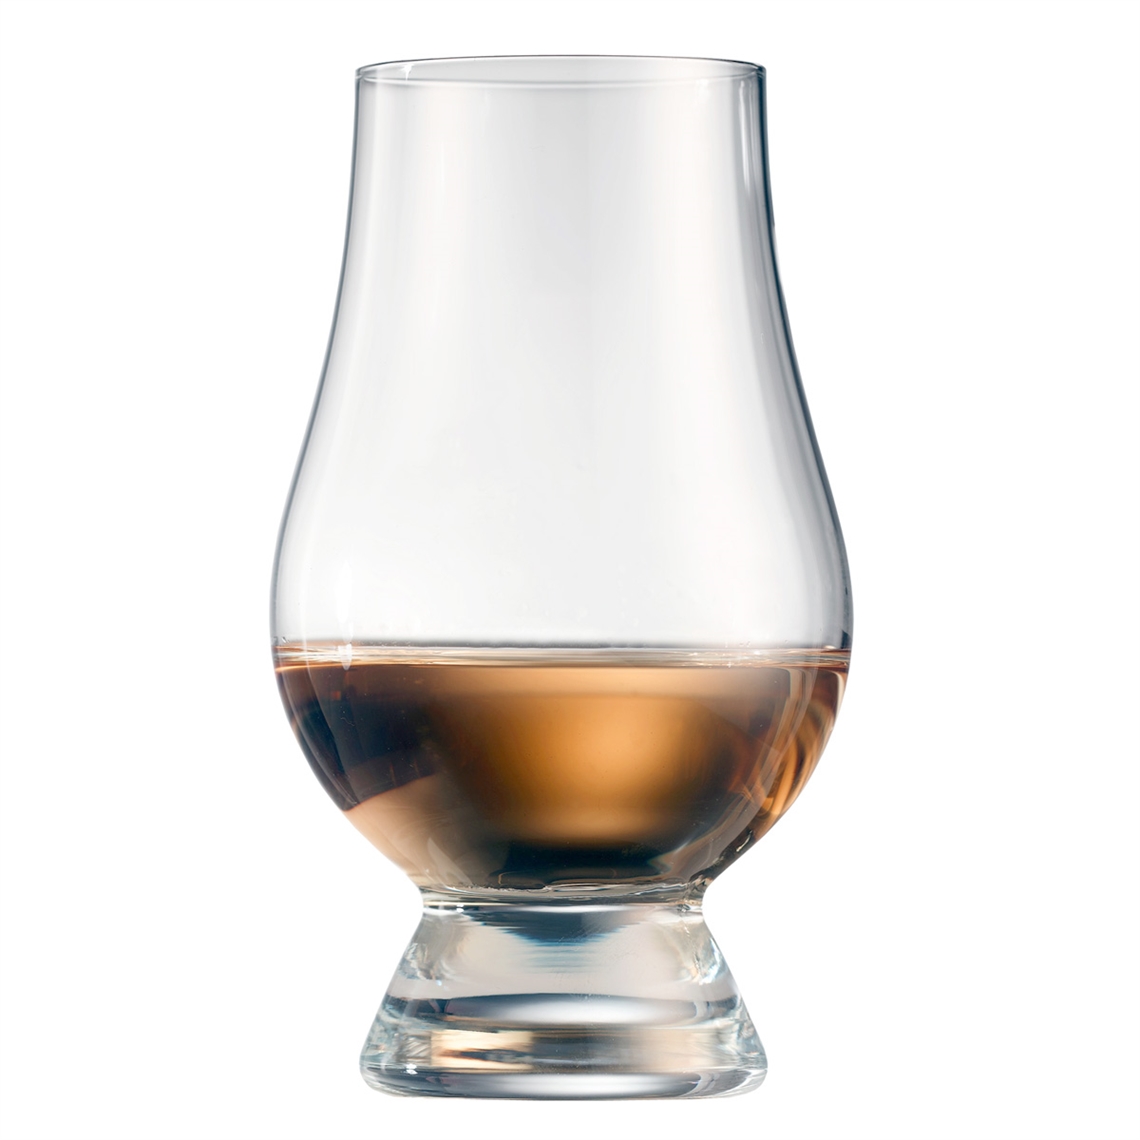 View more rioja wine glasses from our Whisky Glasses range